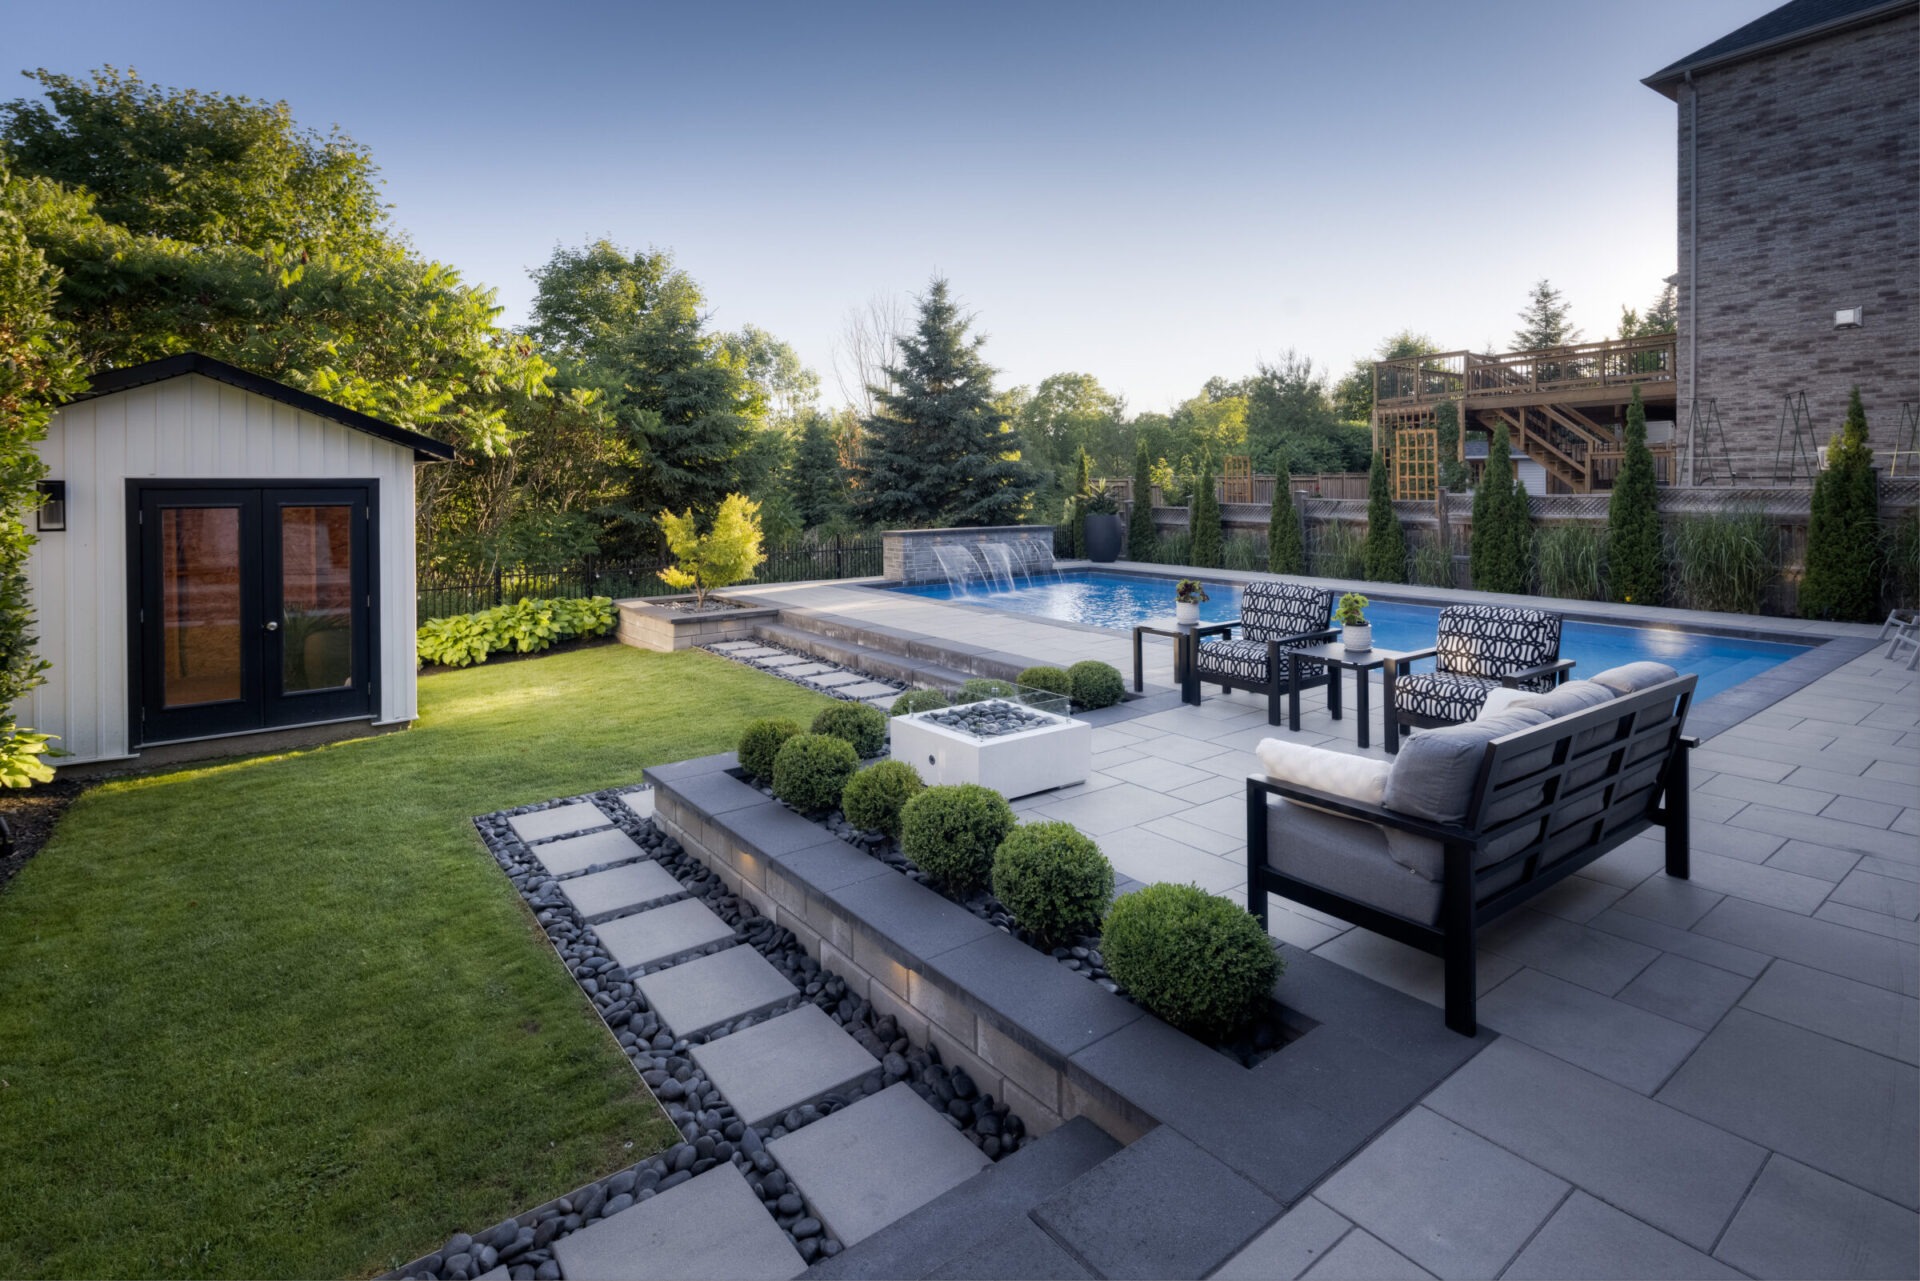 This is a modern backyard with a swimming pool, outdoor seating, manicured lawn, and landscaping. A small shed and a wooden deck are also visible.